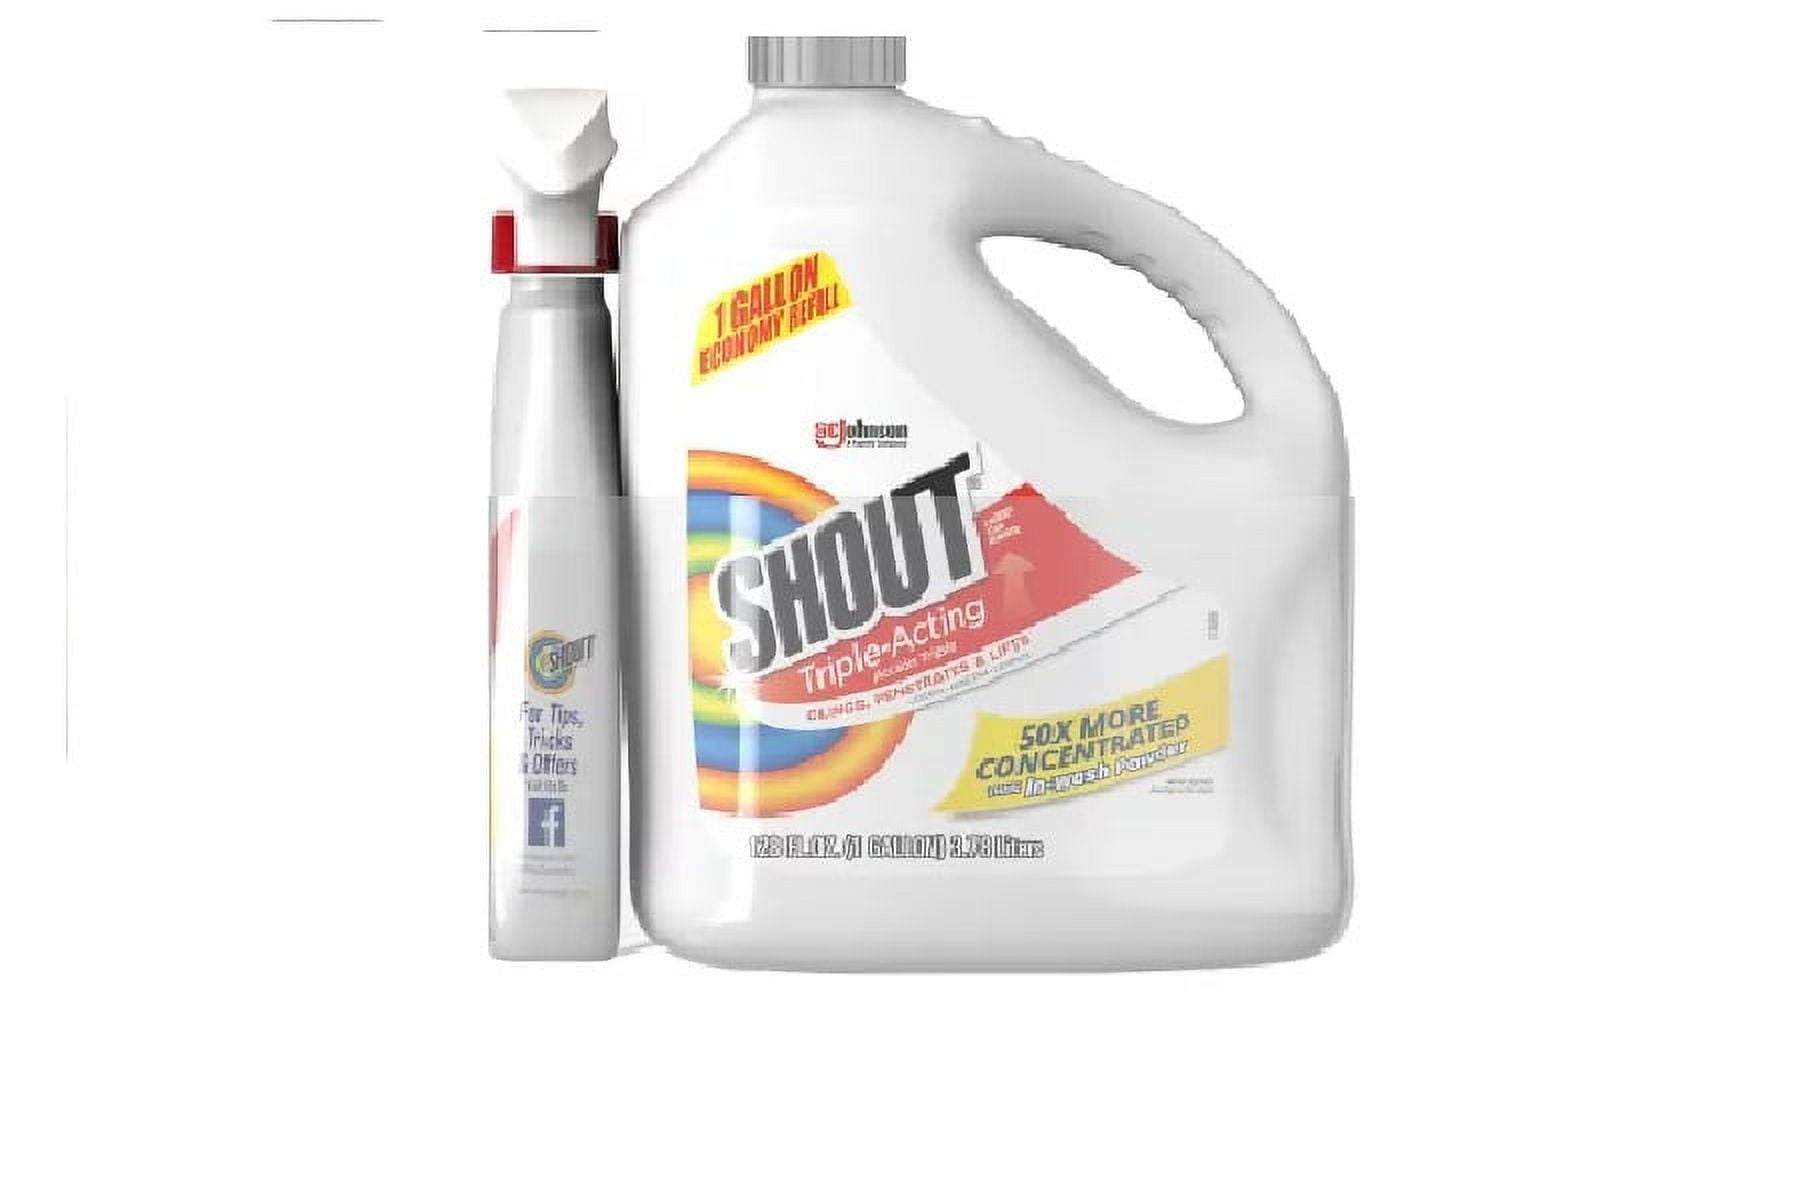 Shout Triple-Acting Laundry Stain Remover, 22 fl oz/650 mL